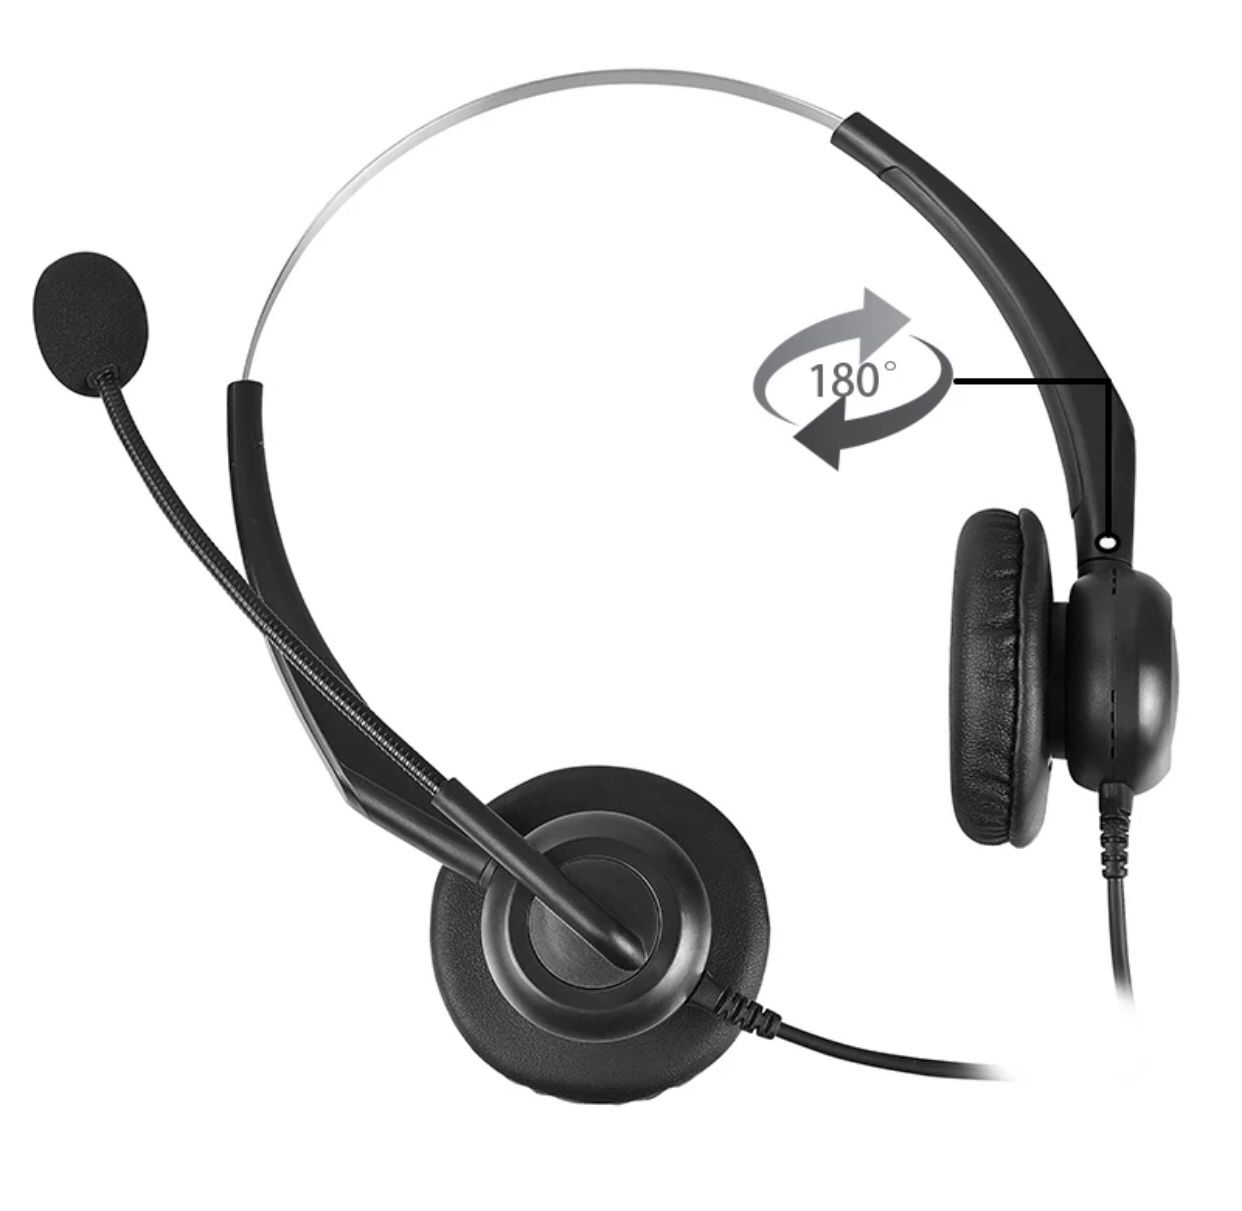 USB Wired Headphones For Work Or school 